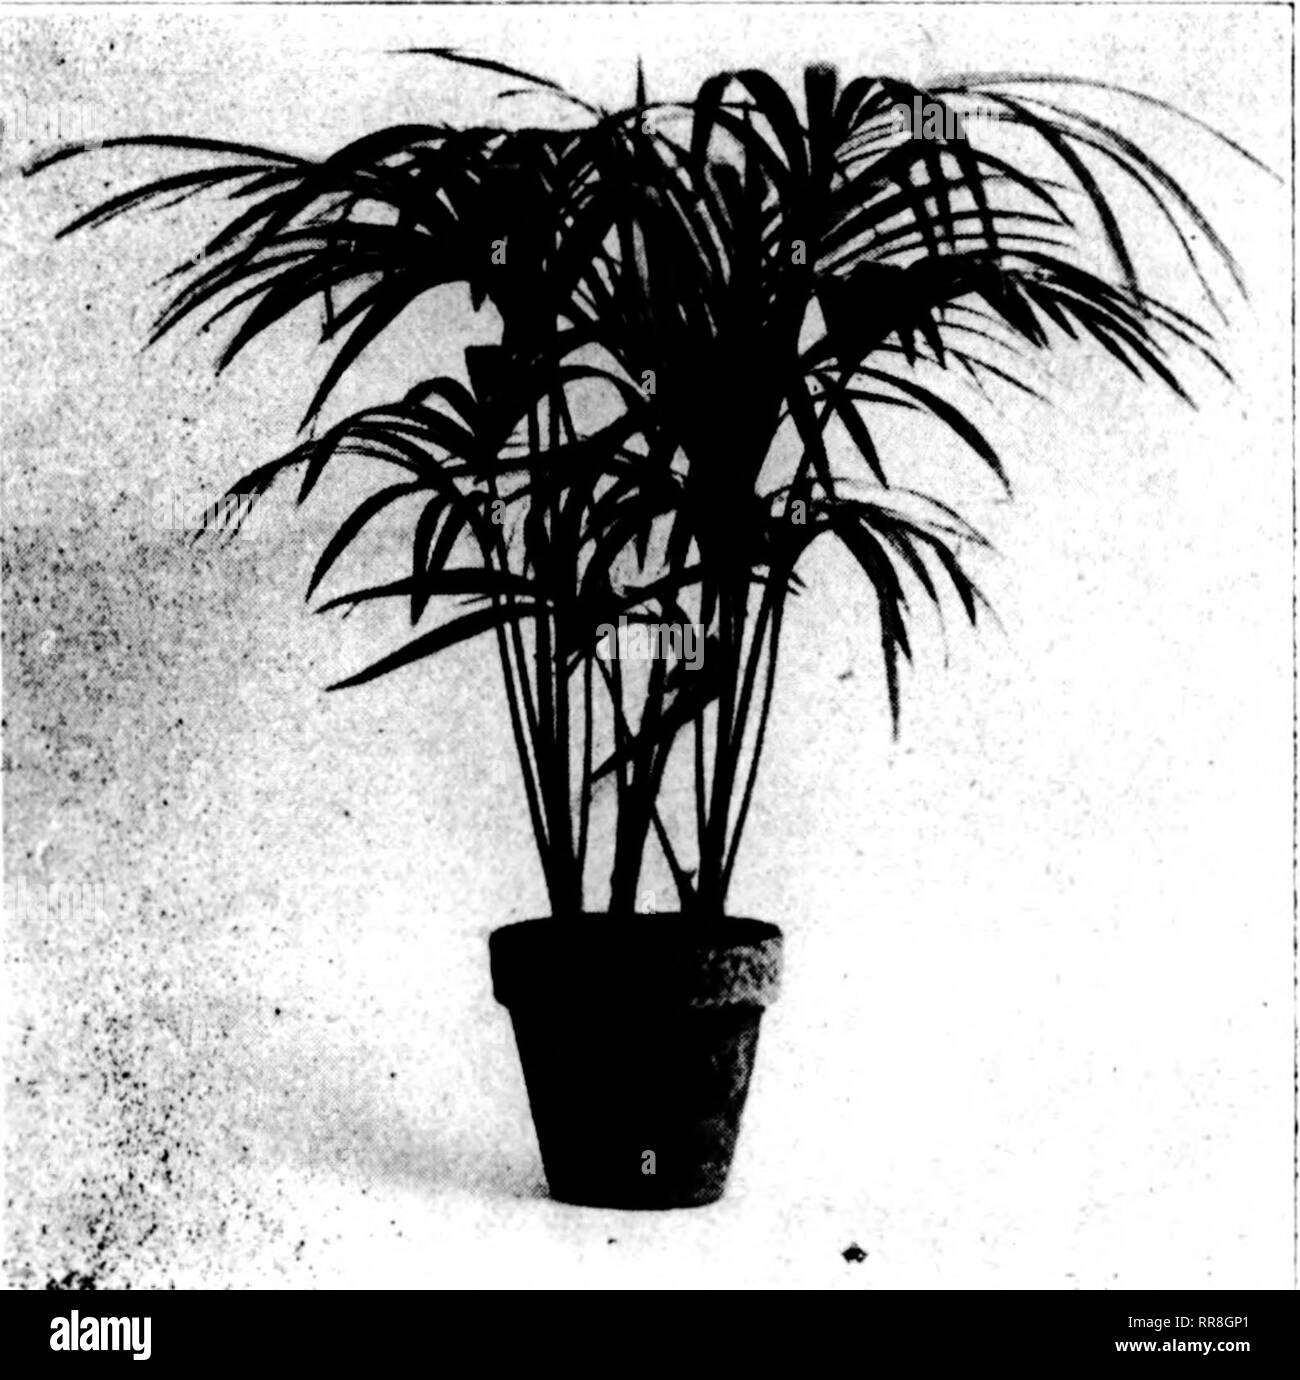 . Florists' review [microform]. Floriculture. .--^ -n- ..y* -n--*^»i- ^f^»:'':'?r. .s''*'&quot;*^&quot; 18 The Florists^ Review Jdlt 6, 1922 SPECIAL OFFER OF ORNA THE BEST TIME TO PALMS. tt^s^^.;*?-/-^, i^«: Our stock is healthy and clean, | in excellent condition. KENTIA BELMOREANA Size; Inches Pot Leaves High Per 100 2-in. 3 to 4 7 to 10 $15.00 3-iii. 5 to 6 9 to 12 25.00 Each 4-in. 5 to 7 12 to 16 $ 0.75 5-in. 6 to 7 14 to 20 $1.00 to 1.50 6-iii, 6 to 7 18 to 24 3.00 7-in., made up, 3 in a pot, 18 to 24 inches high 4.00 7-in., in tubs, made up, 24 to 30 inches high, specimens 6.00 8-in., i Stock Photo